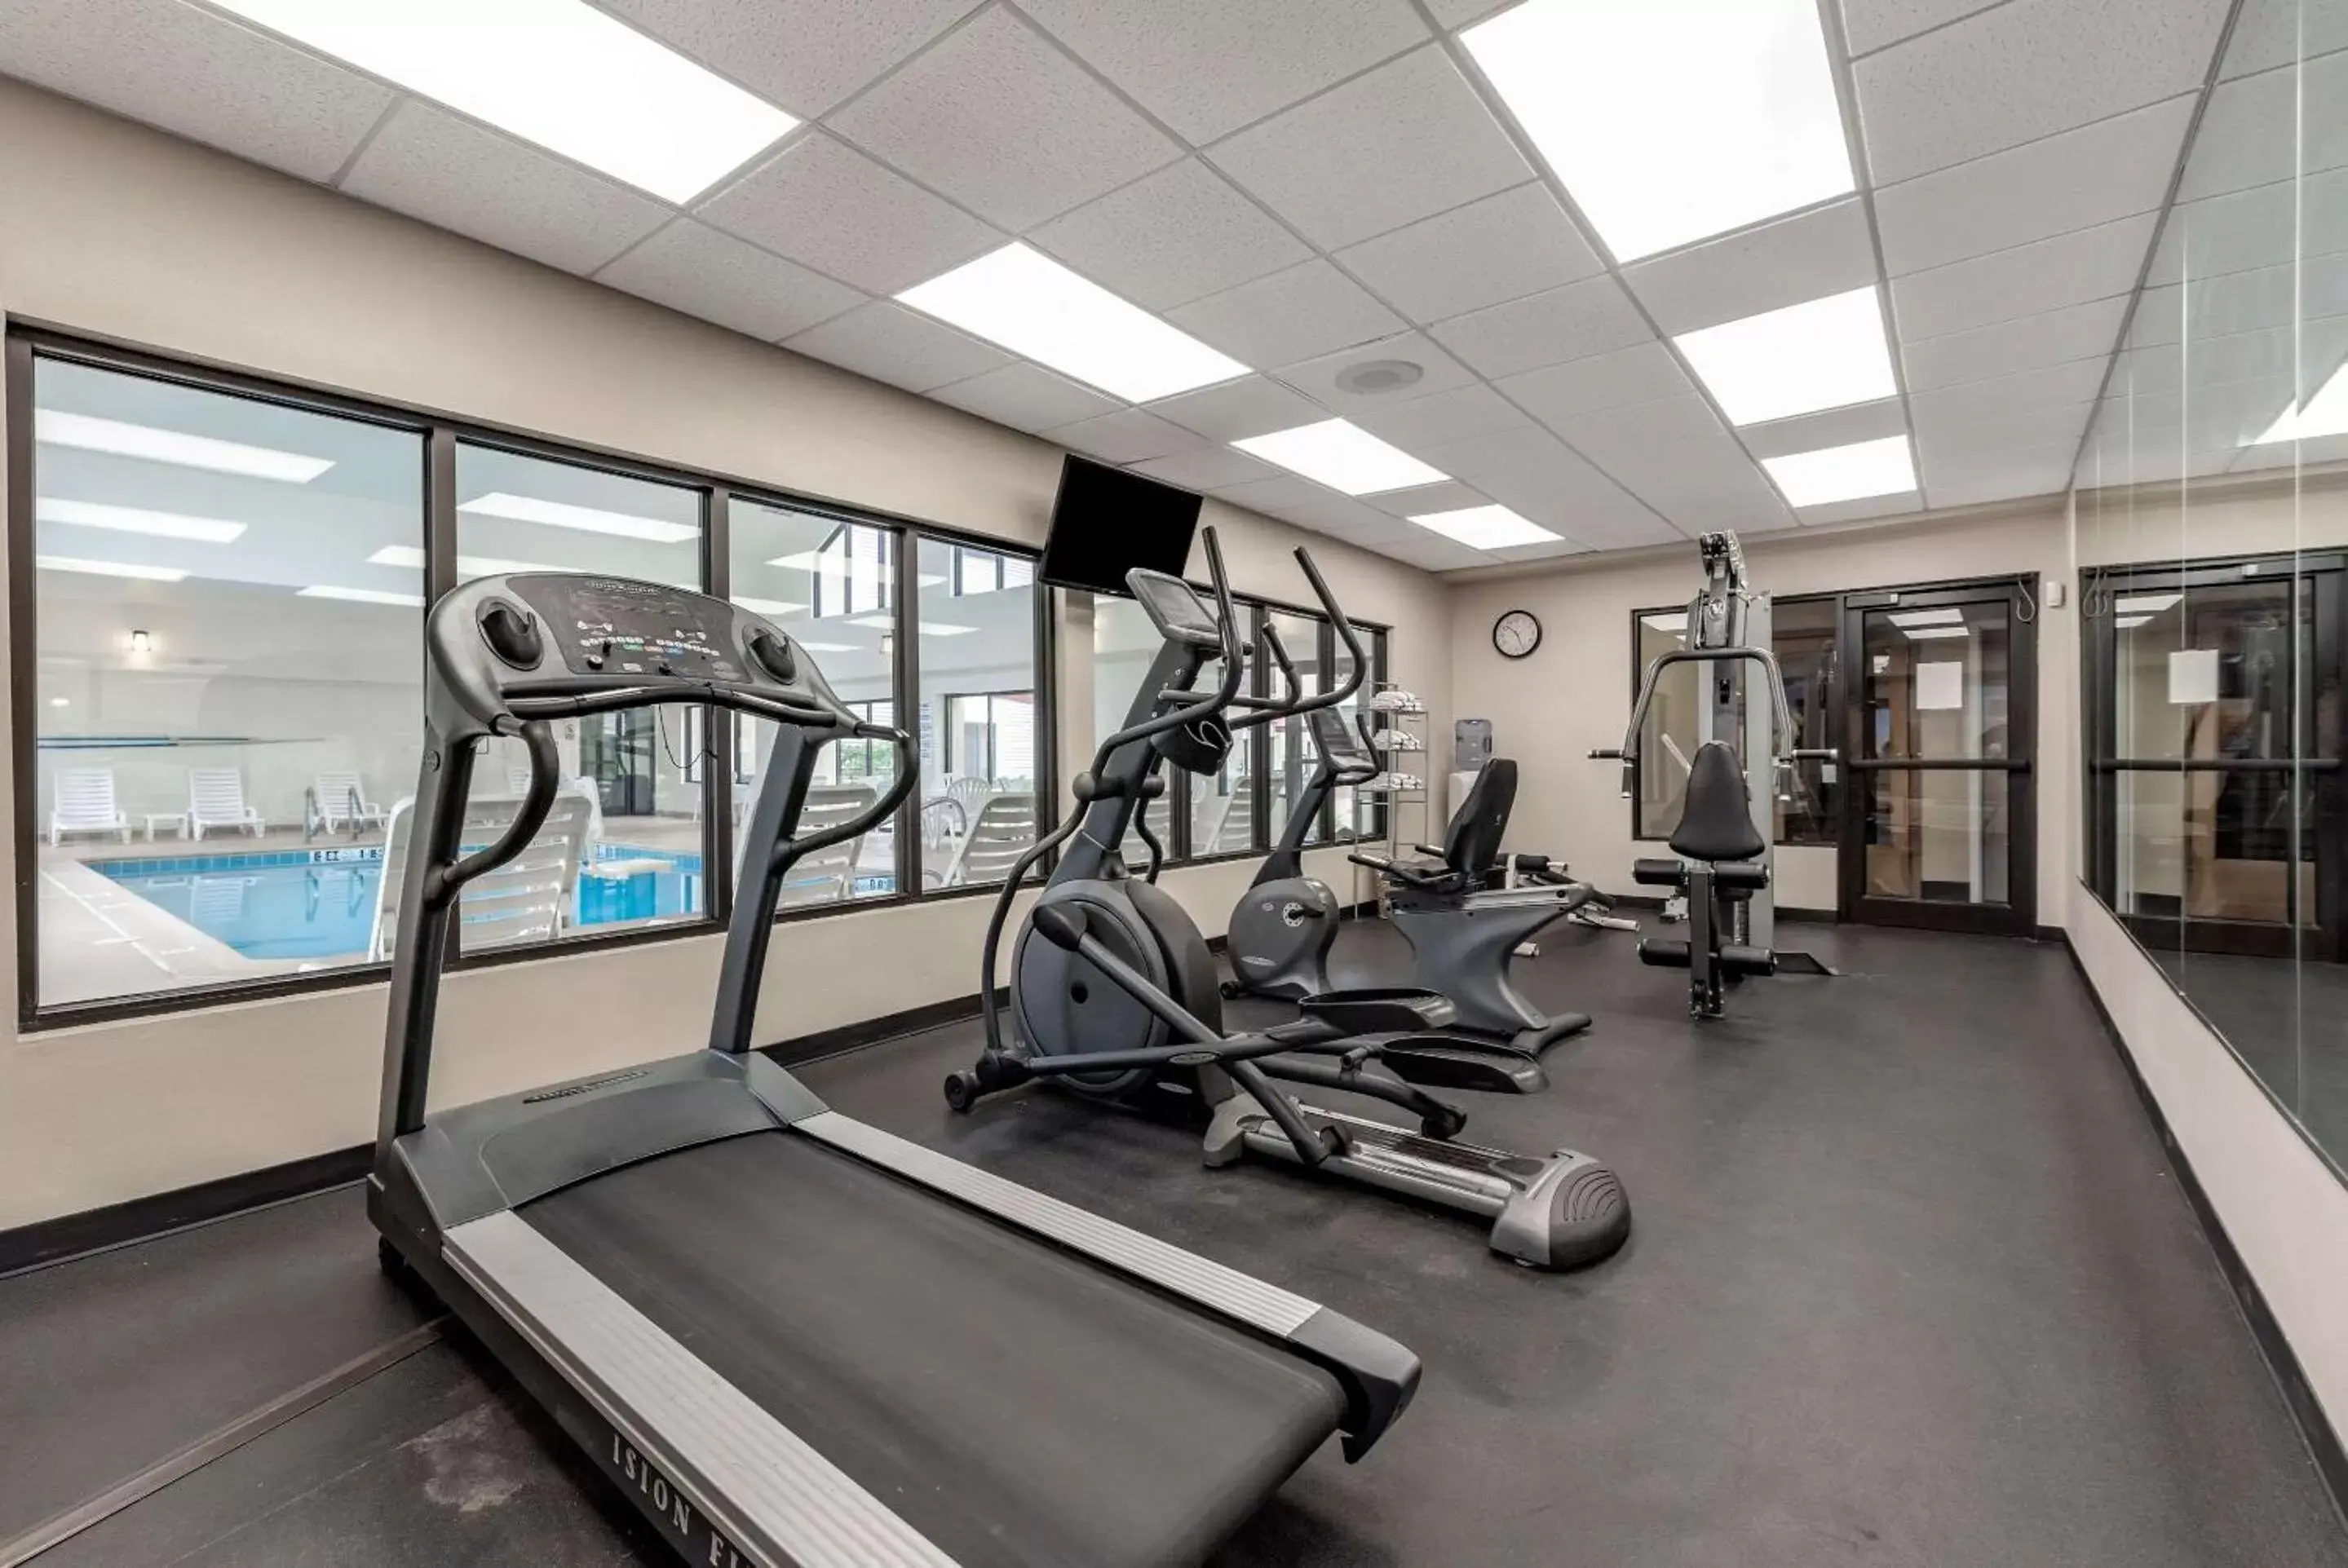 Fitness centre/facilities, Fitness Center/Facilities in Comfort Inn & Suites Warsaw near US-30